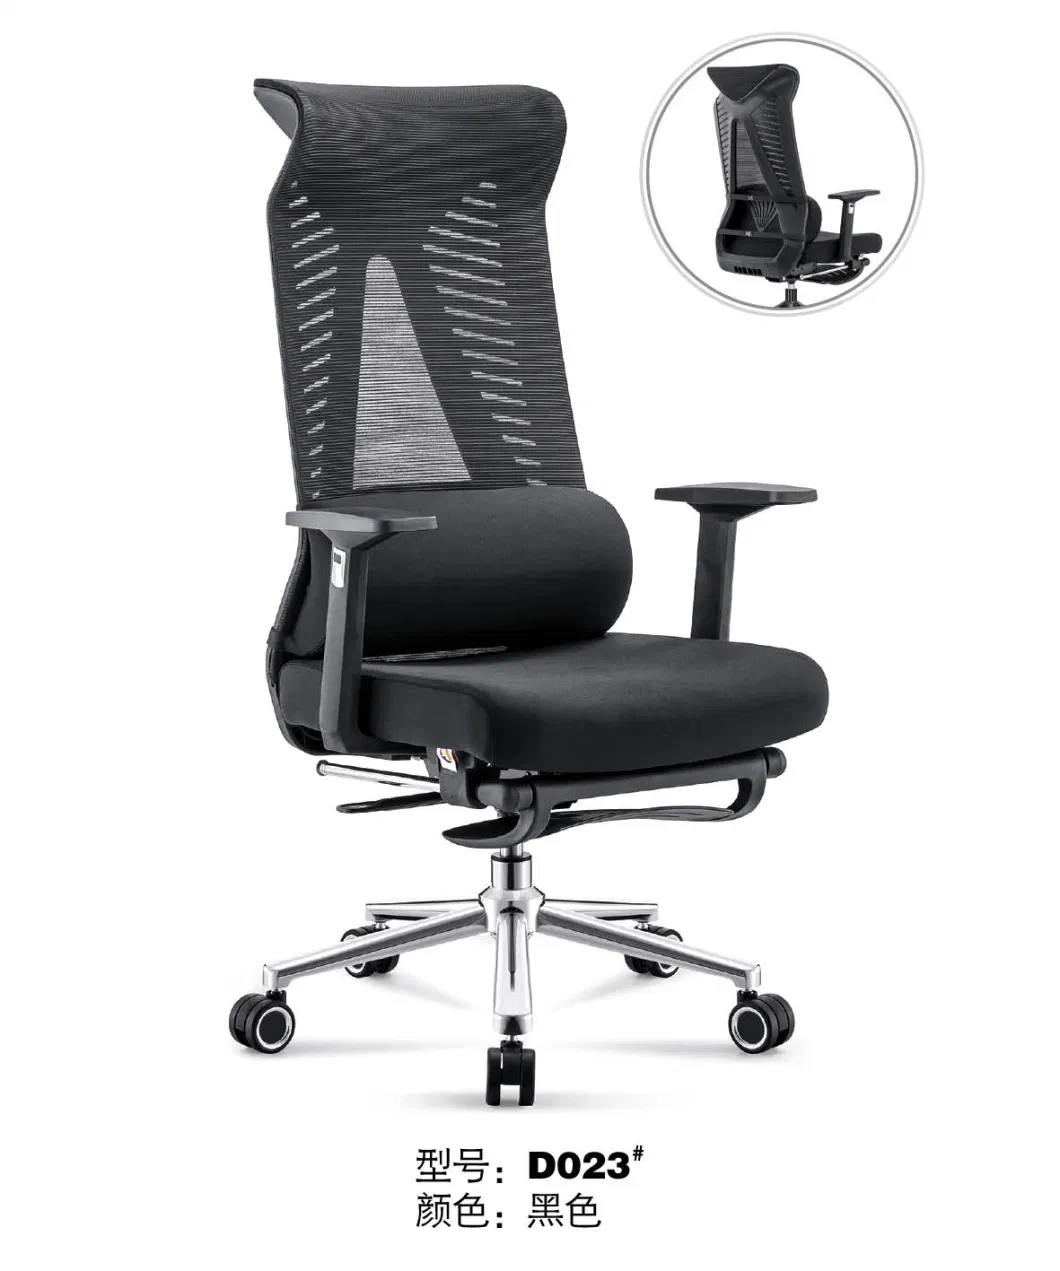 Home Ajustable Office Chair Recliner Chair Whith Footrest